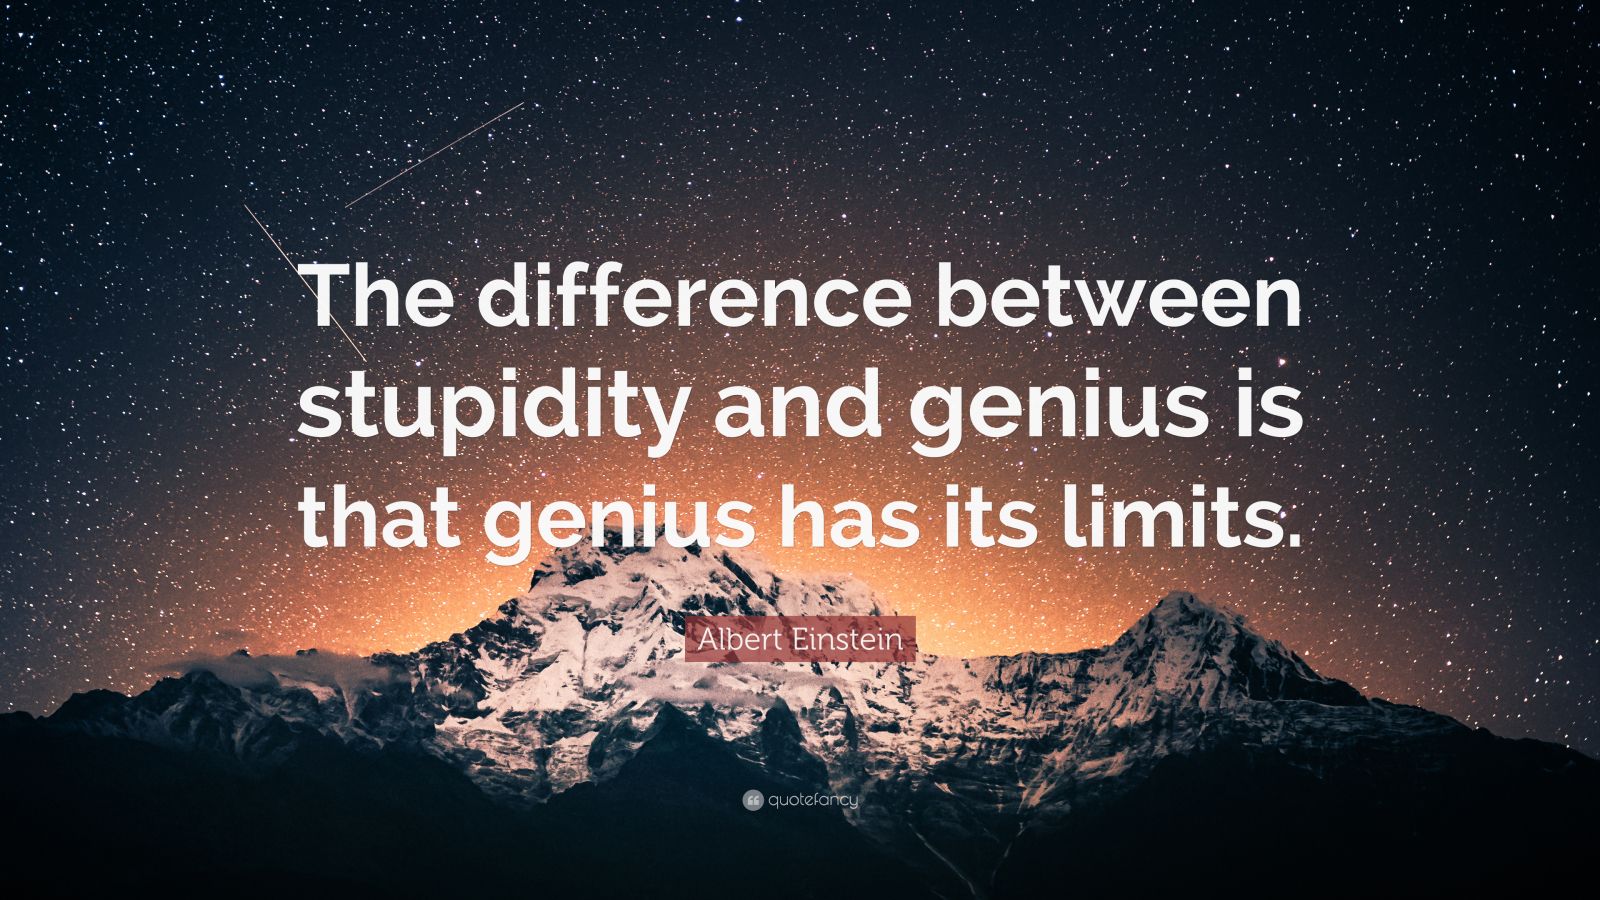 Albert Einstein Quote: “The difference between stupidity and genius is